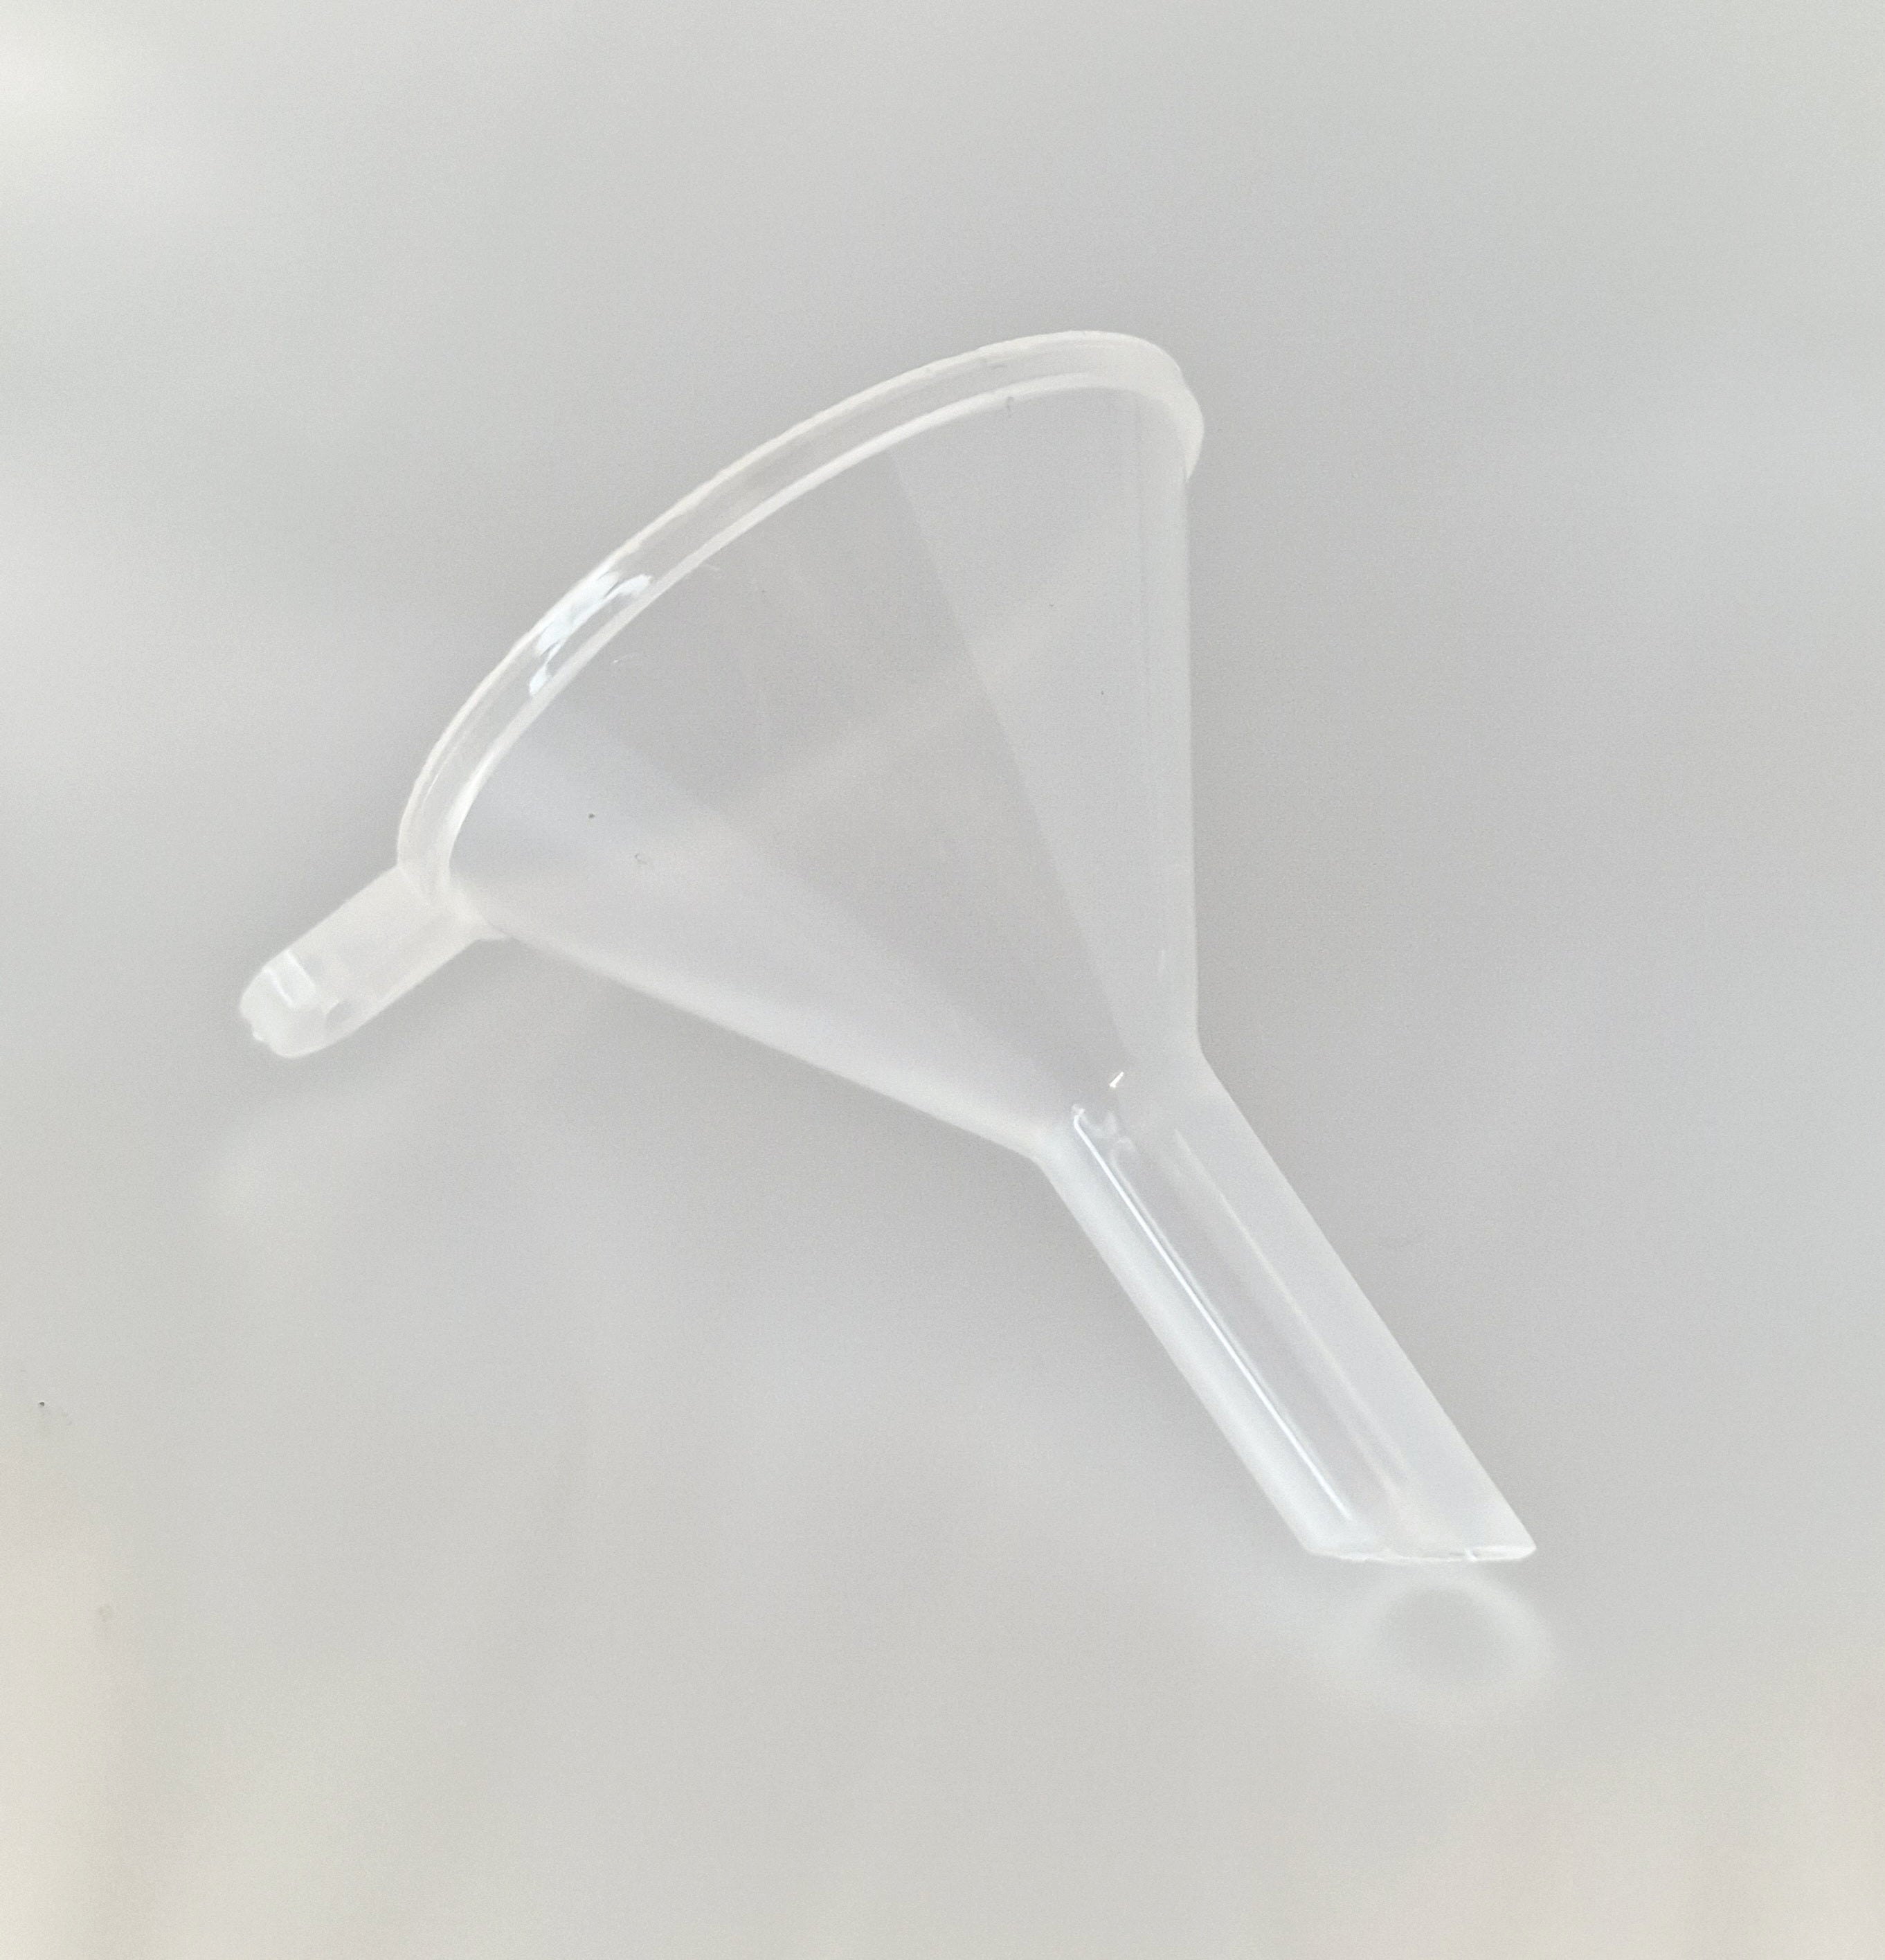 MajorCrafts 12pcs Clear Mini Funnels For Micro Beads, Perfumes, Essential Oils, Sand art, Spices, Travel Bottles etc.